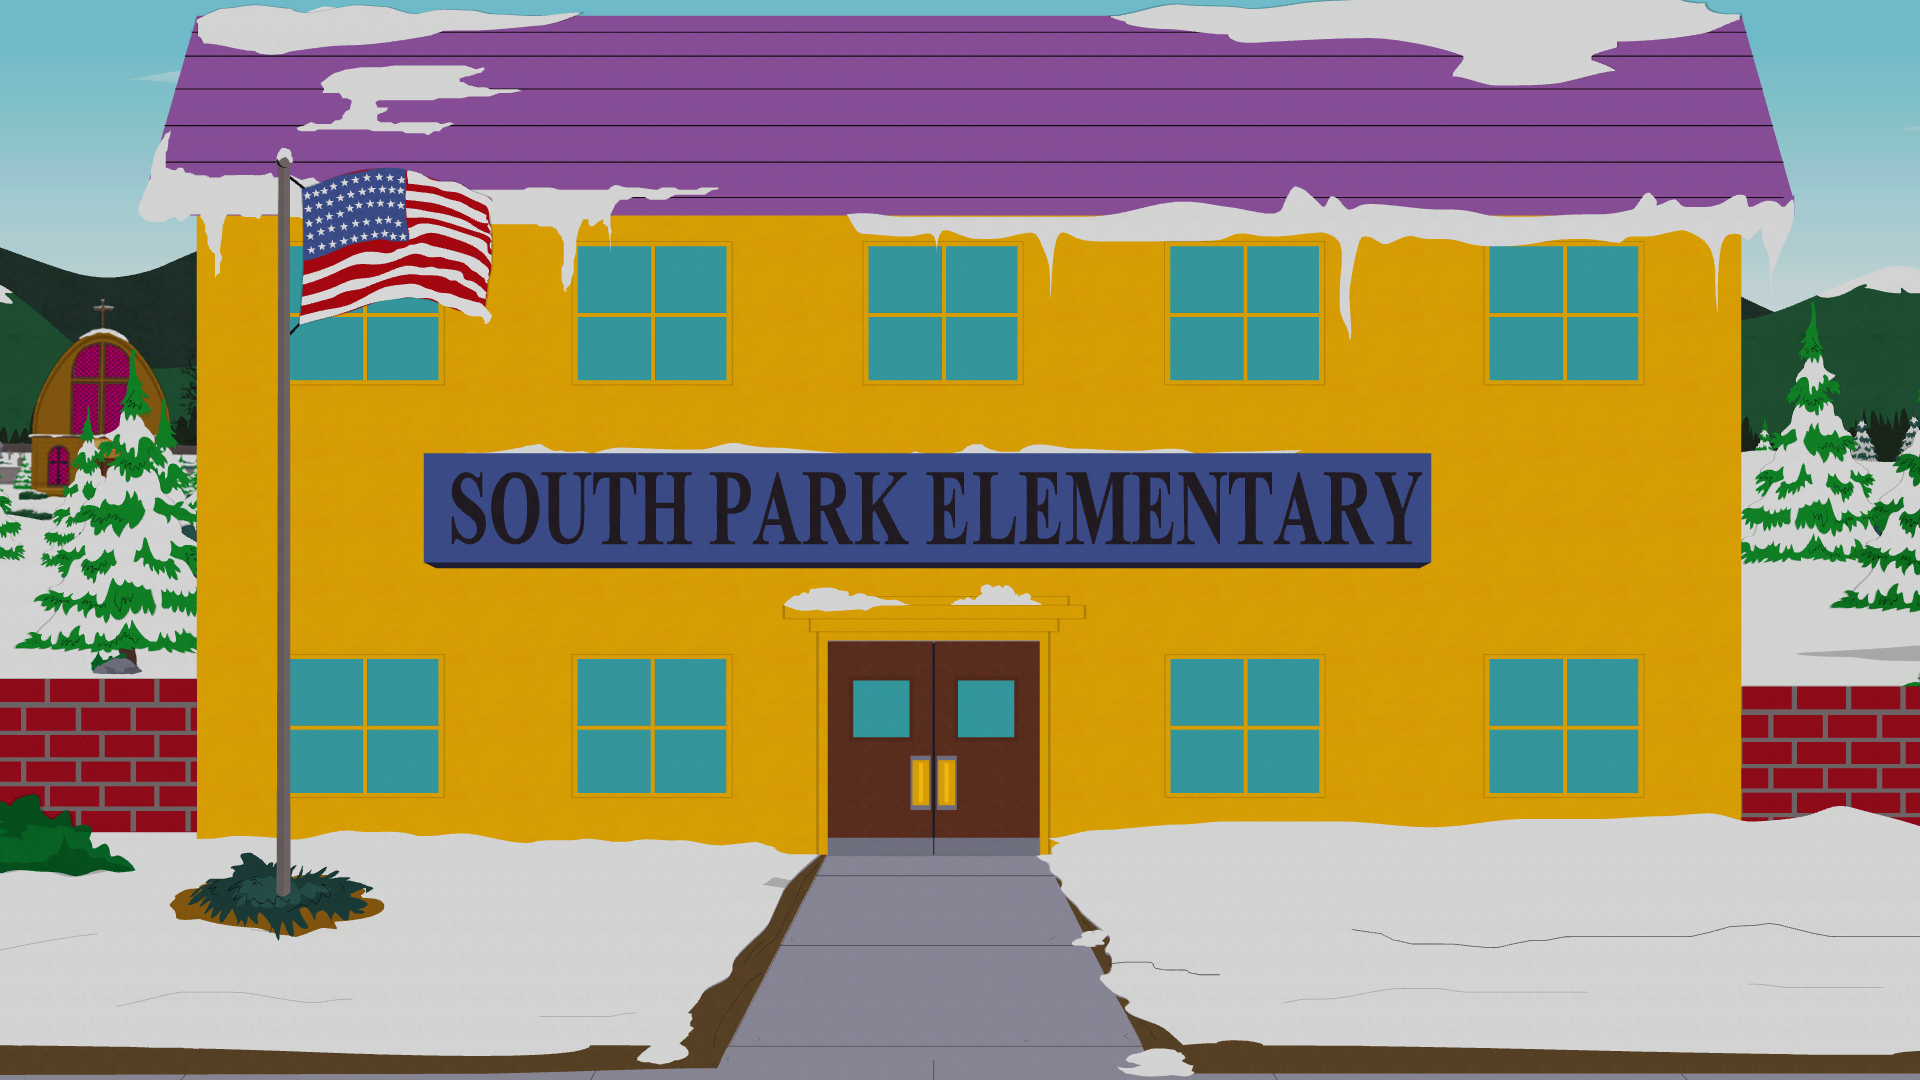 South Park Elementary Playground, South Park Archives